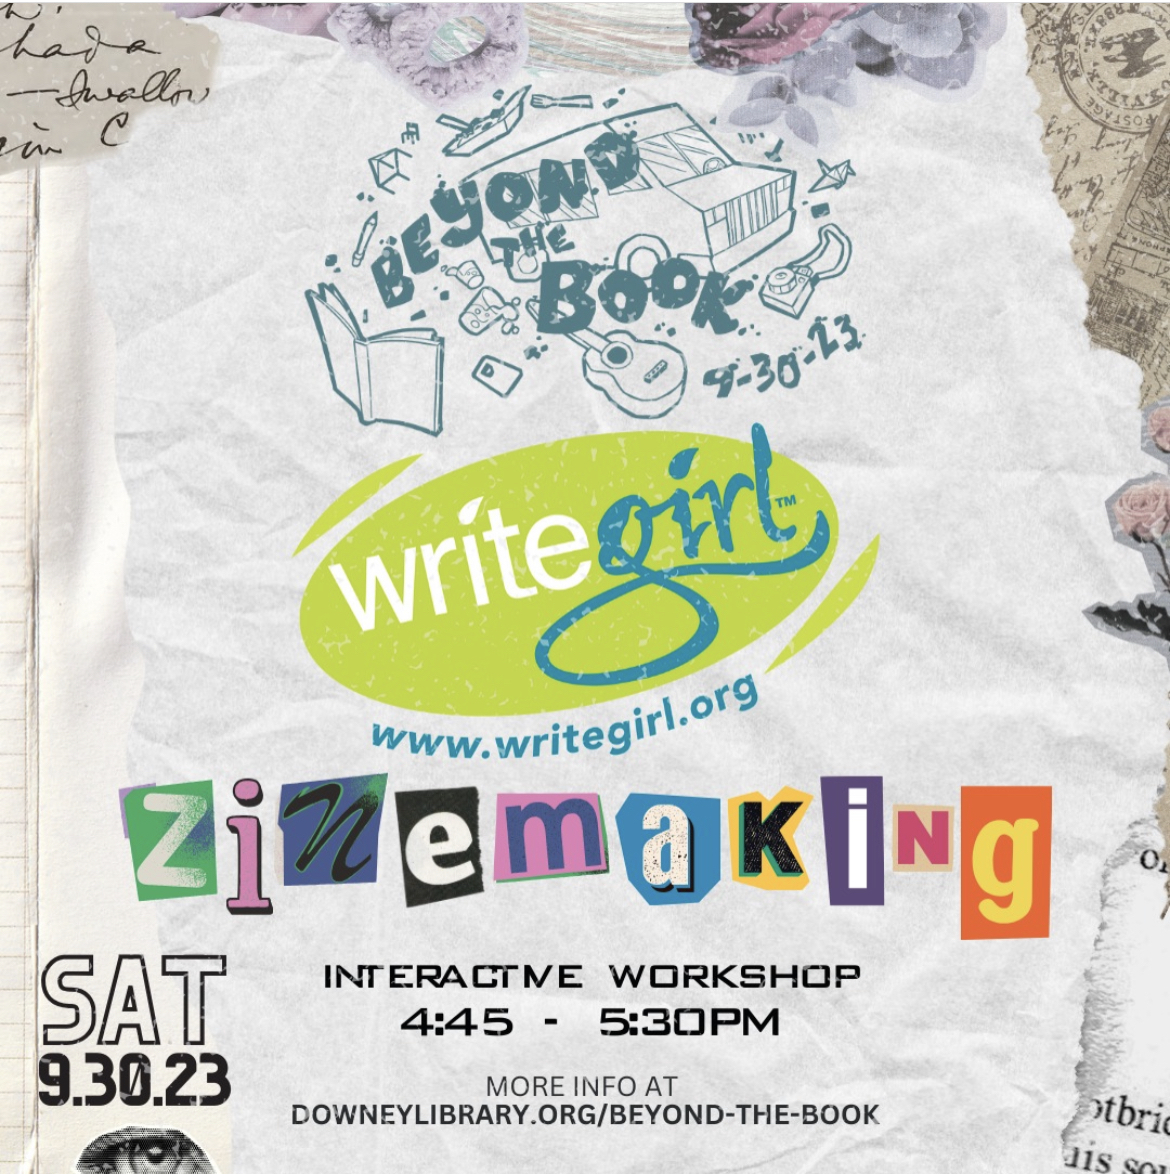 Let’s get creative! Join us this Saturday, Sept. 30th for @DowneyLibrary's Beyond the Book event! We’re running two Zine Workshops (4:45pm - 5:05pm and 5:15pm - 5:35pm). You can also catch us at the Poetry Reading at 4pm. Details: downeylibrary.org/beyond-the-book